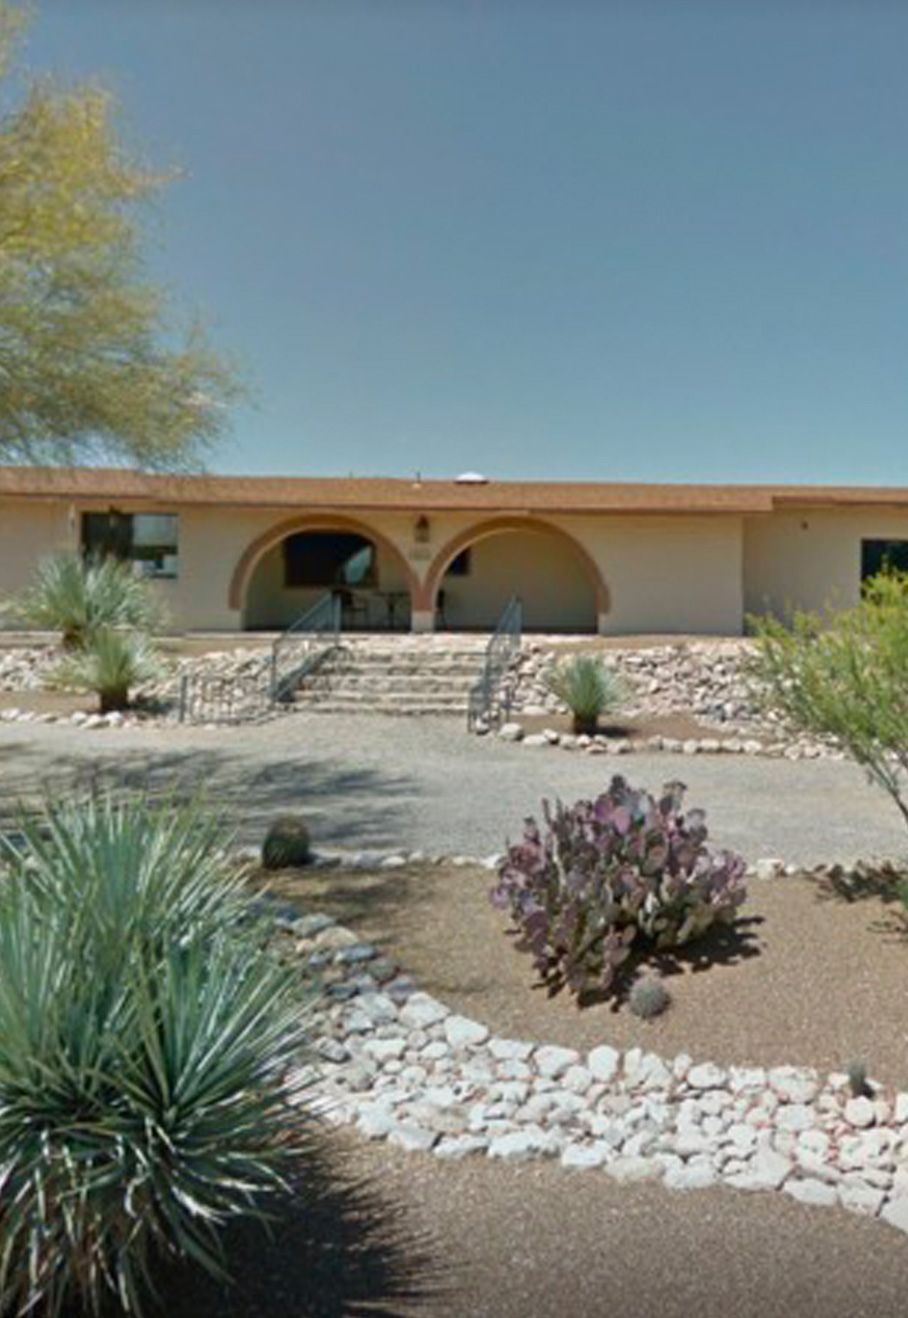 Canyon View Adult Care Home in Tucson